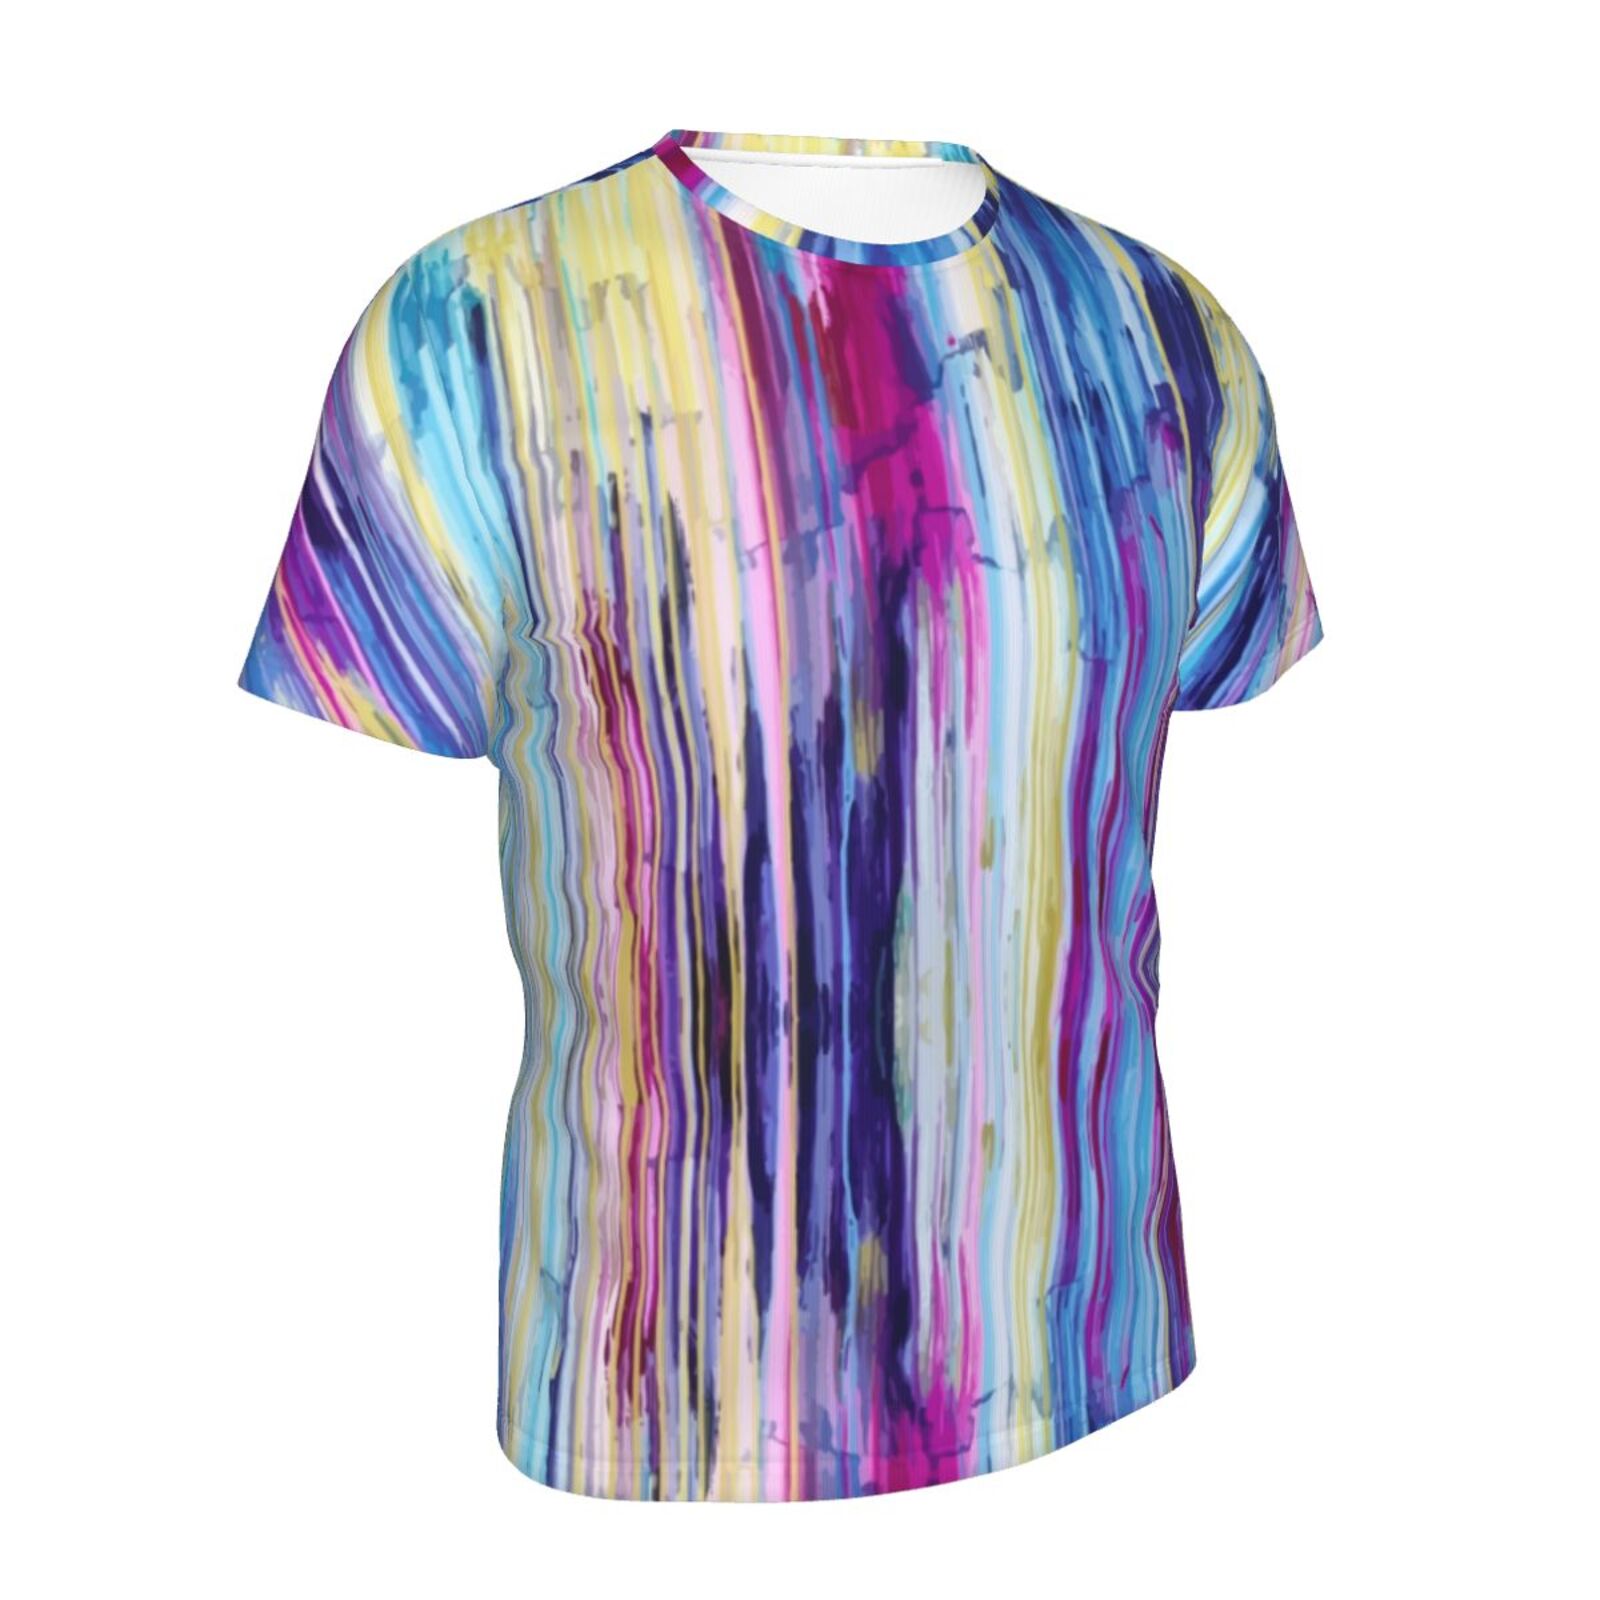 The Emotional Creation Painting Elements Classic T-shirt